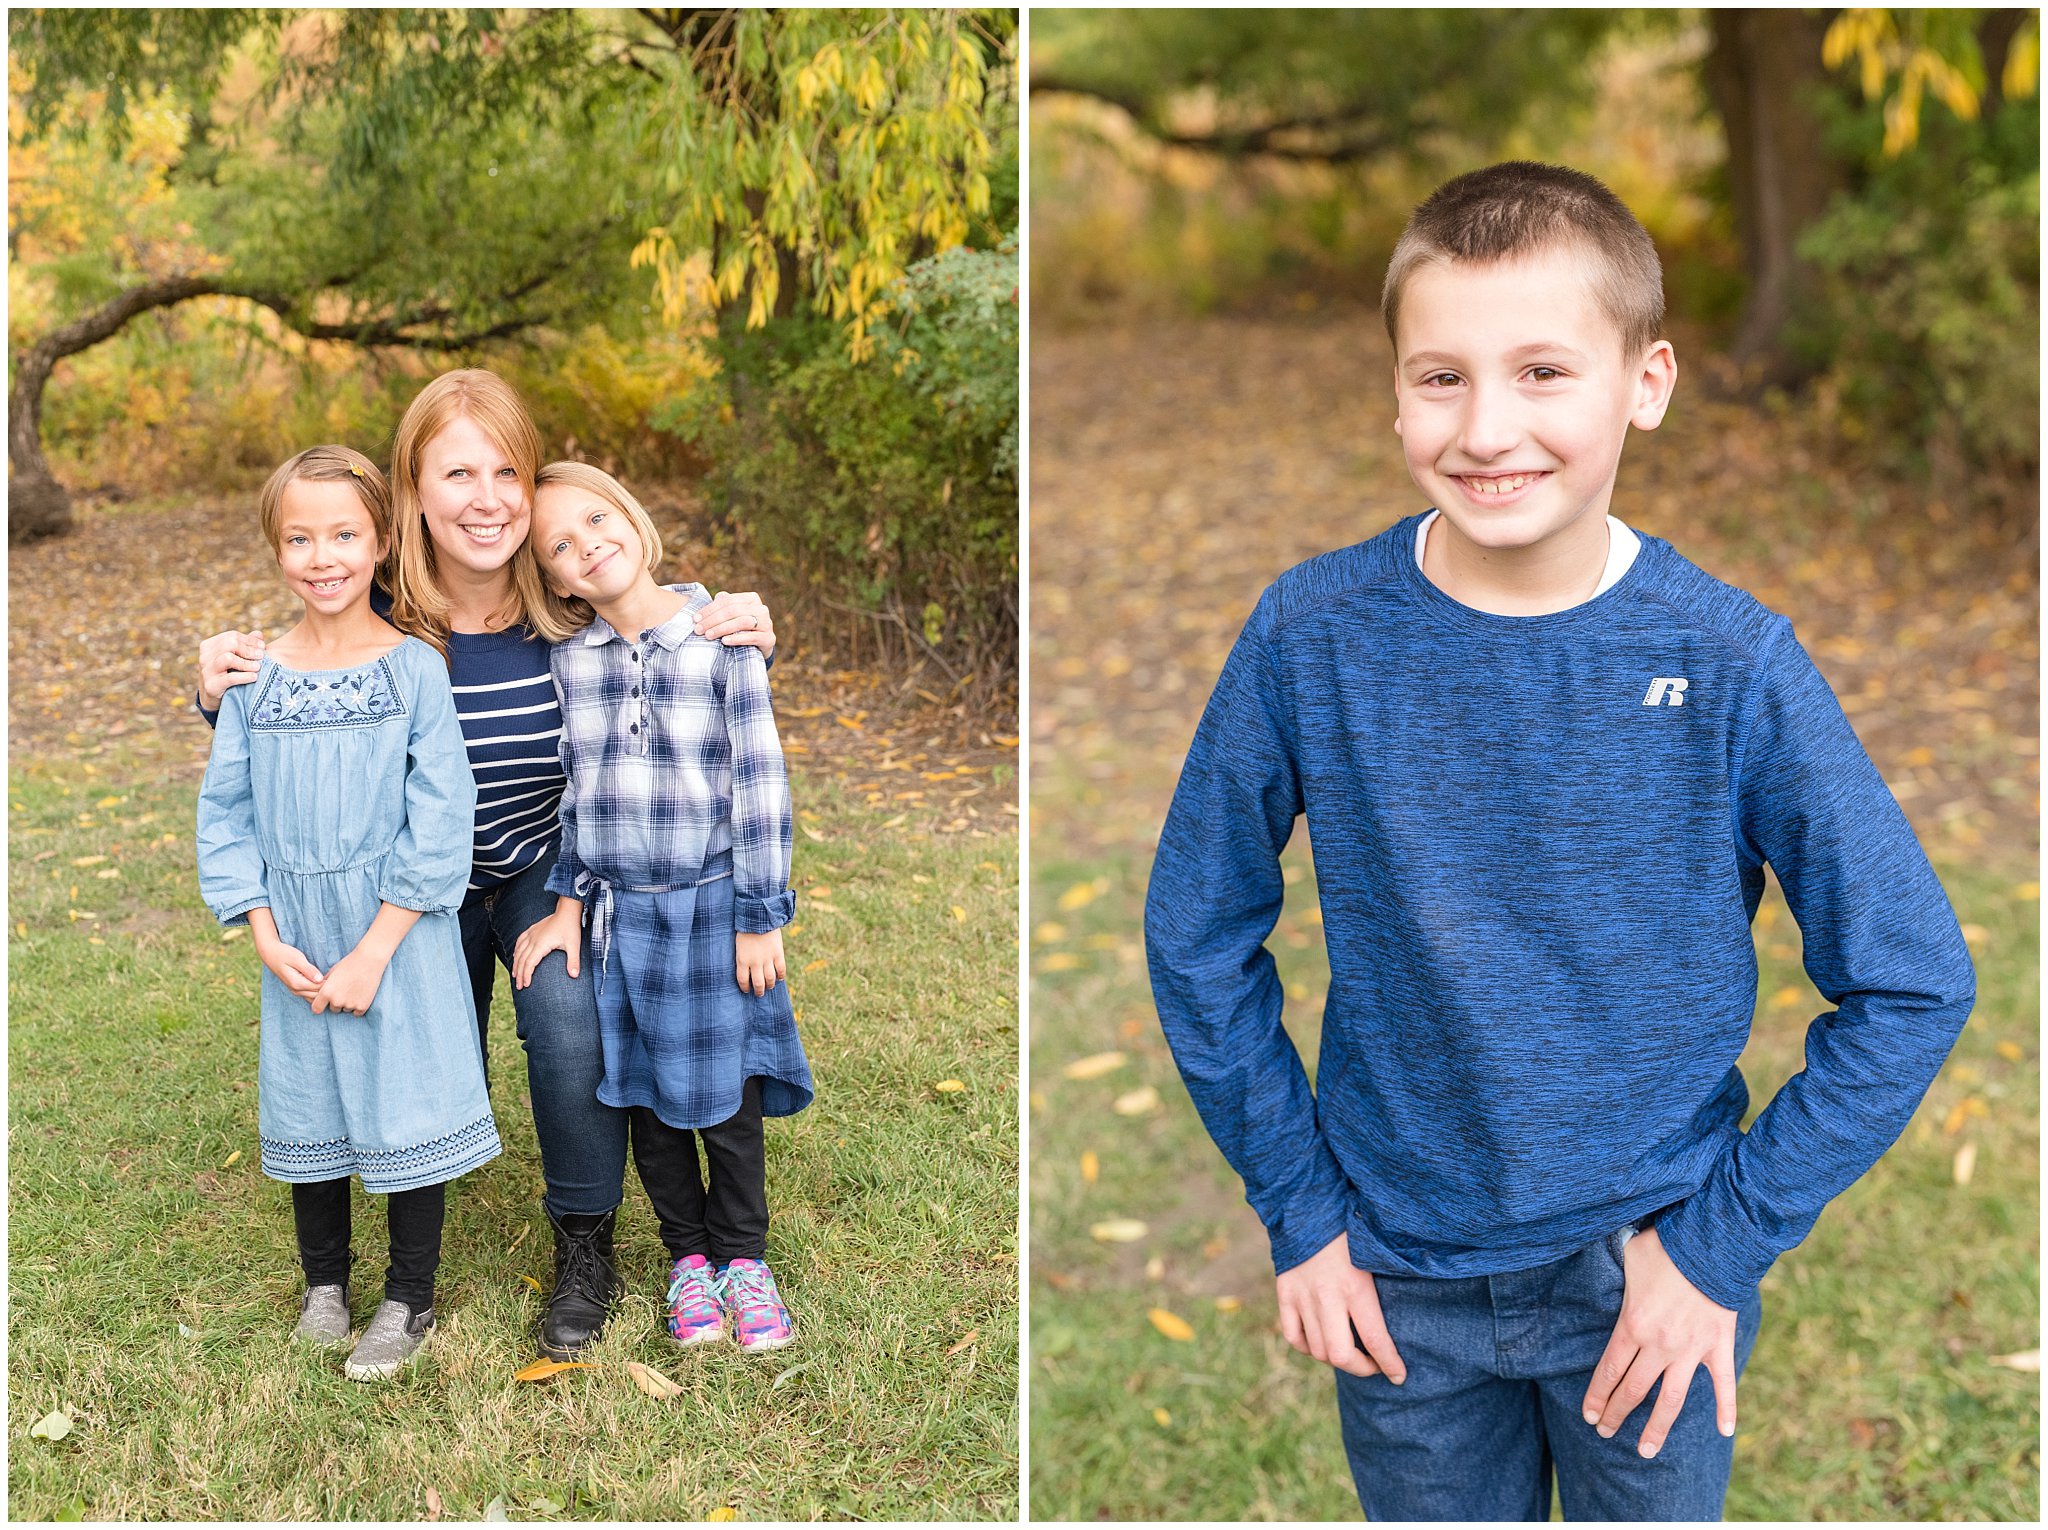 Boy and family smiling at the camera | Tremonton Family Pictures and Make a Wish Event | Jessie and Dallin Photography